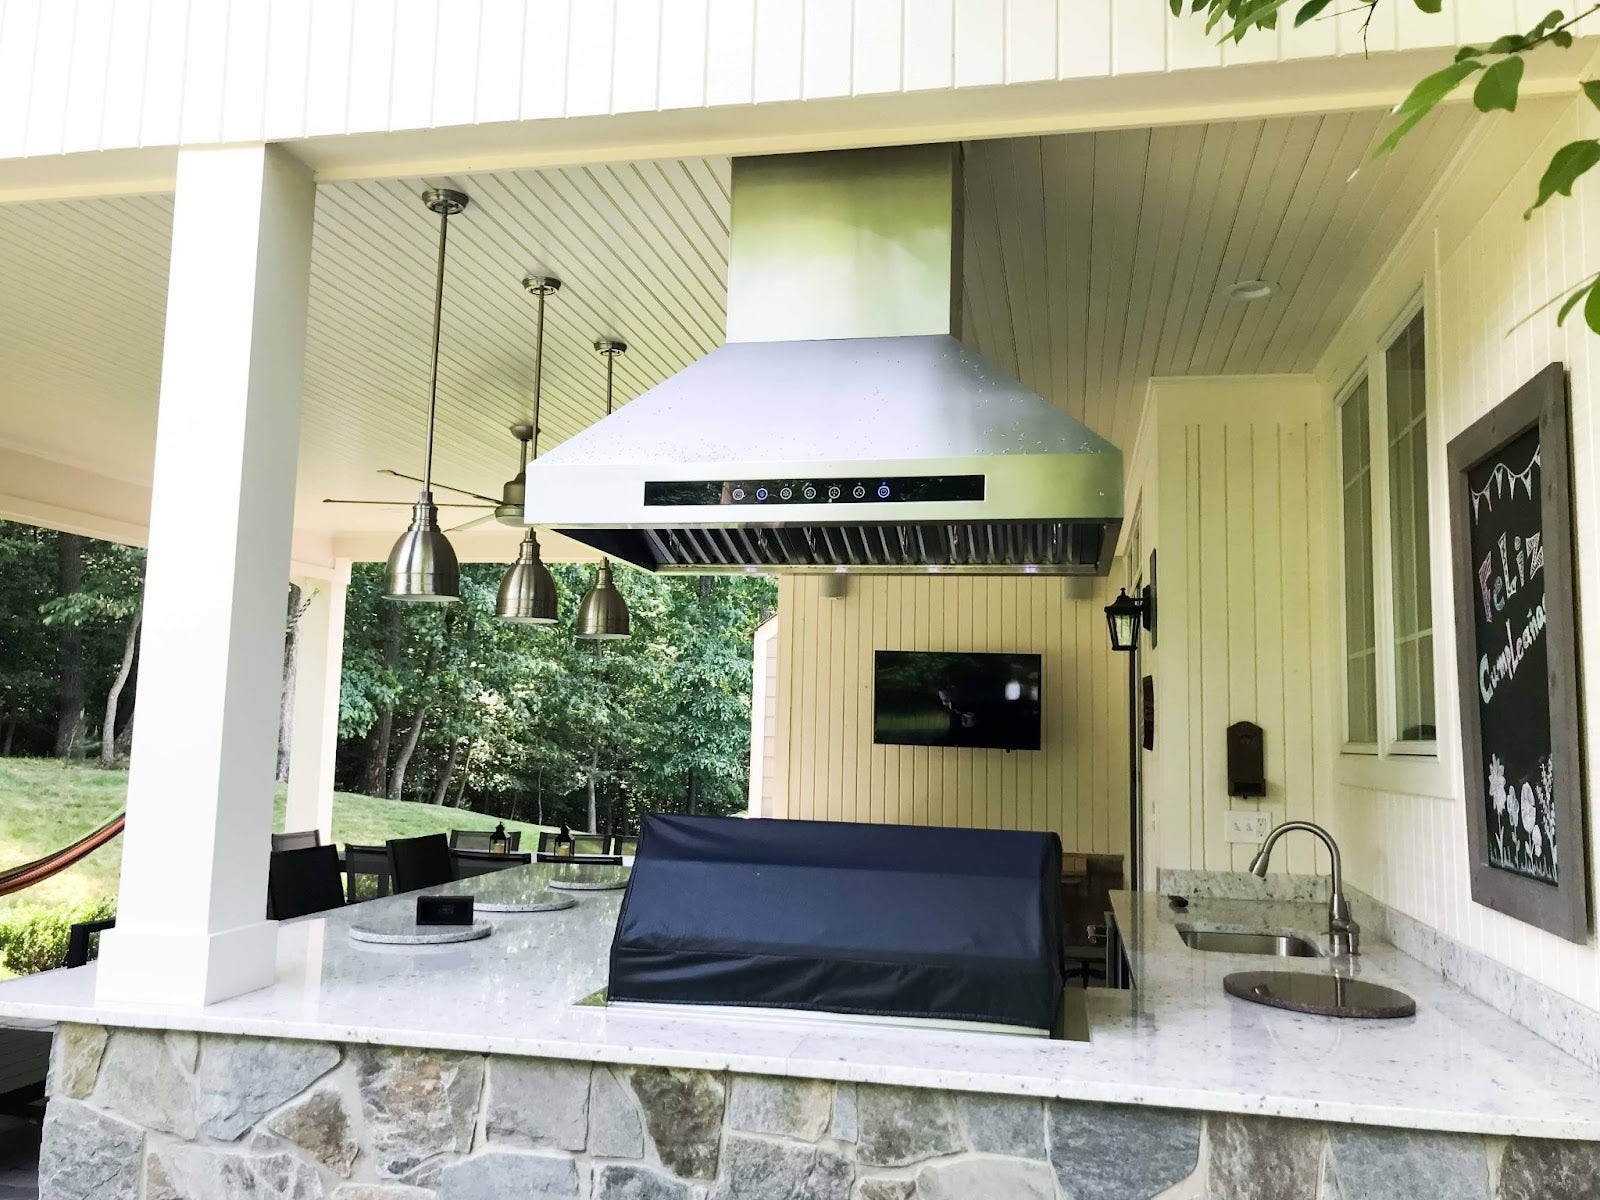 Charming outdoor entertaining area complete with a modern grill under a ventilation hood, ambient lighting, and a TV, all under a covered patio with verdant surroundings.